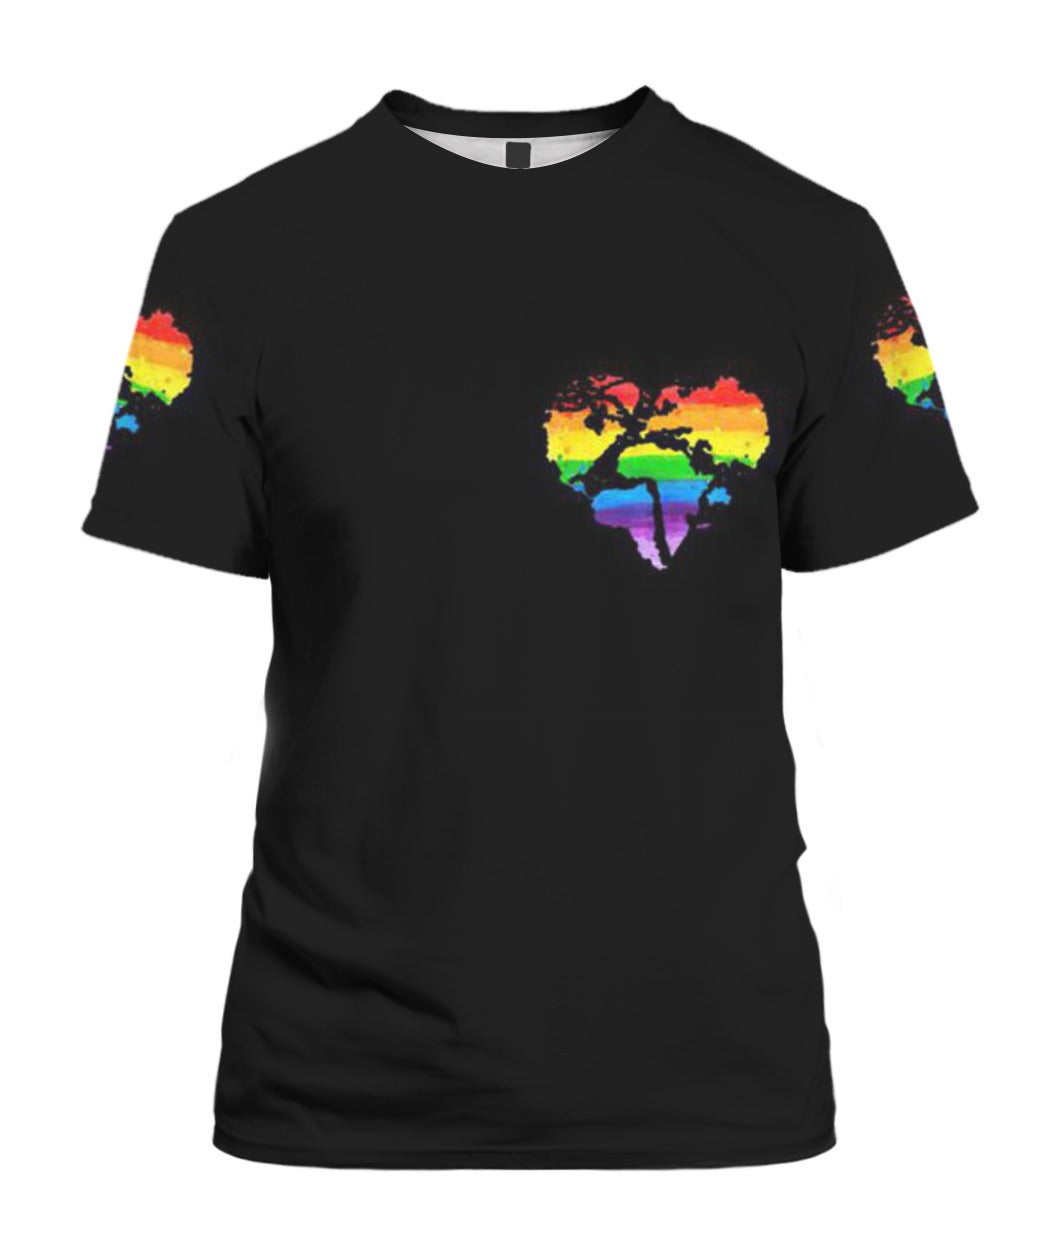 It Is Ok To Be Difference Elephant Rainbow Colors 3D T Shirt For Gay Lesbian/ Best Gift For Lgbt Friend Gay Lesbian Gifts